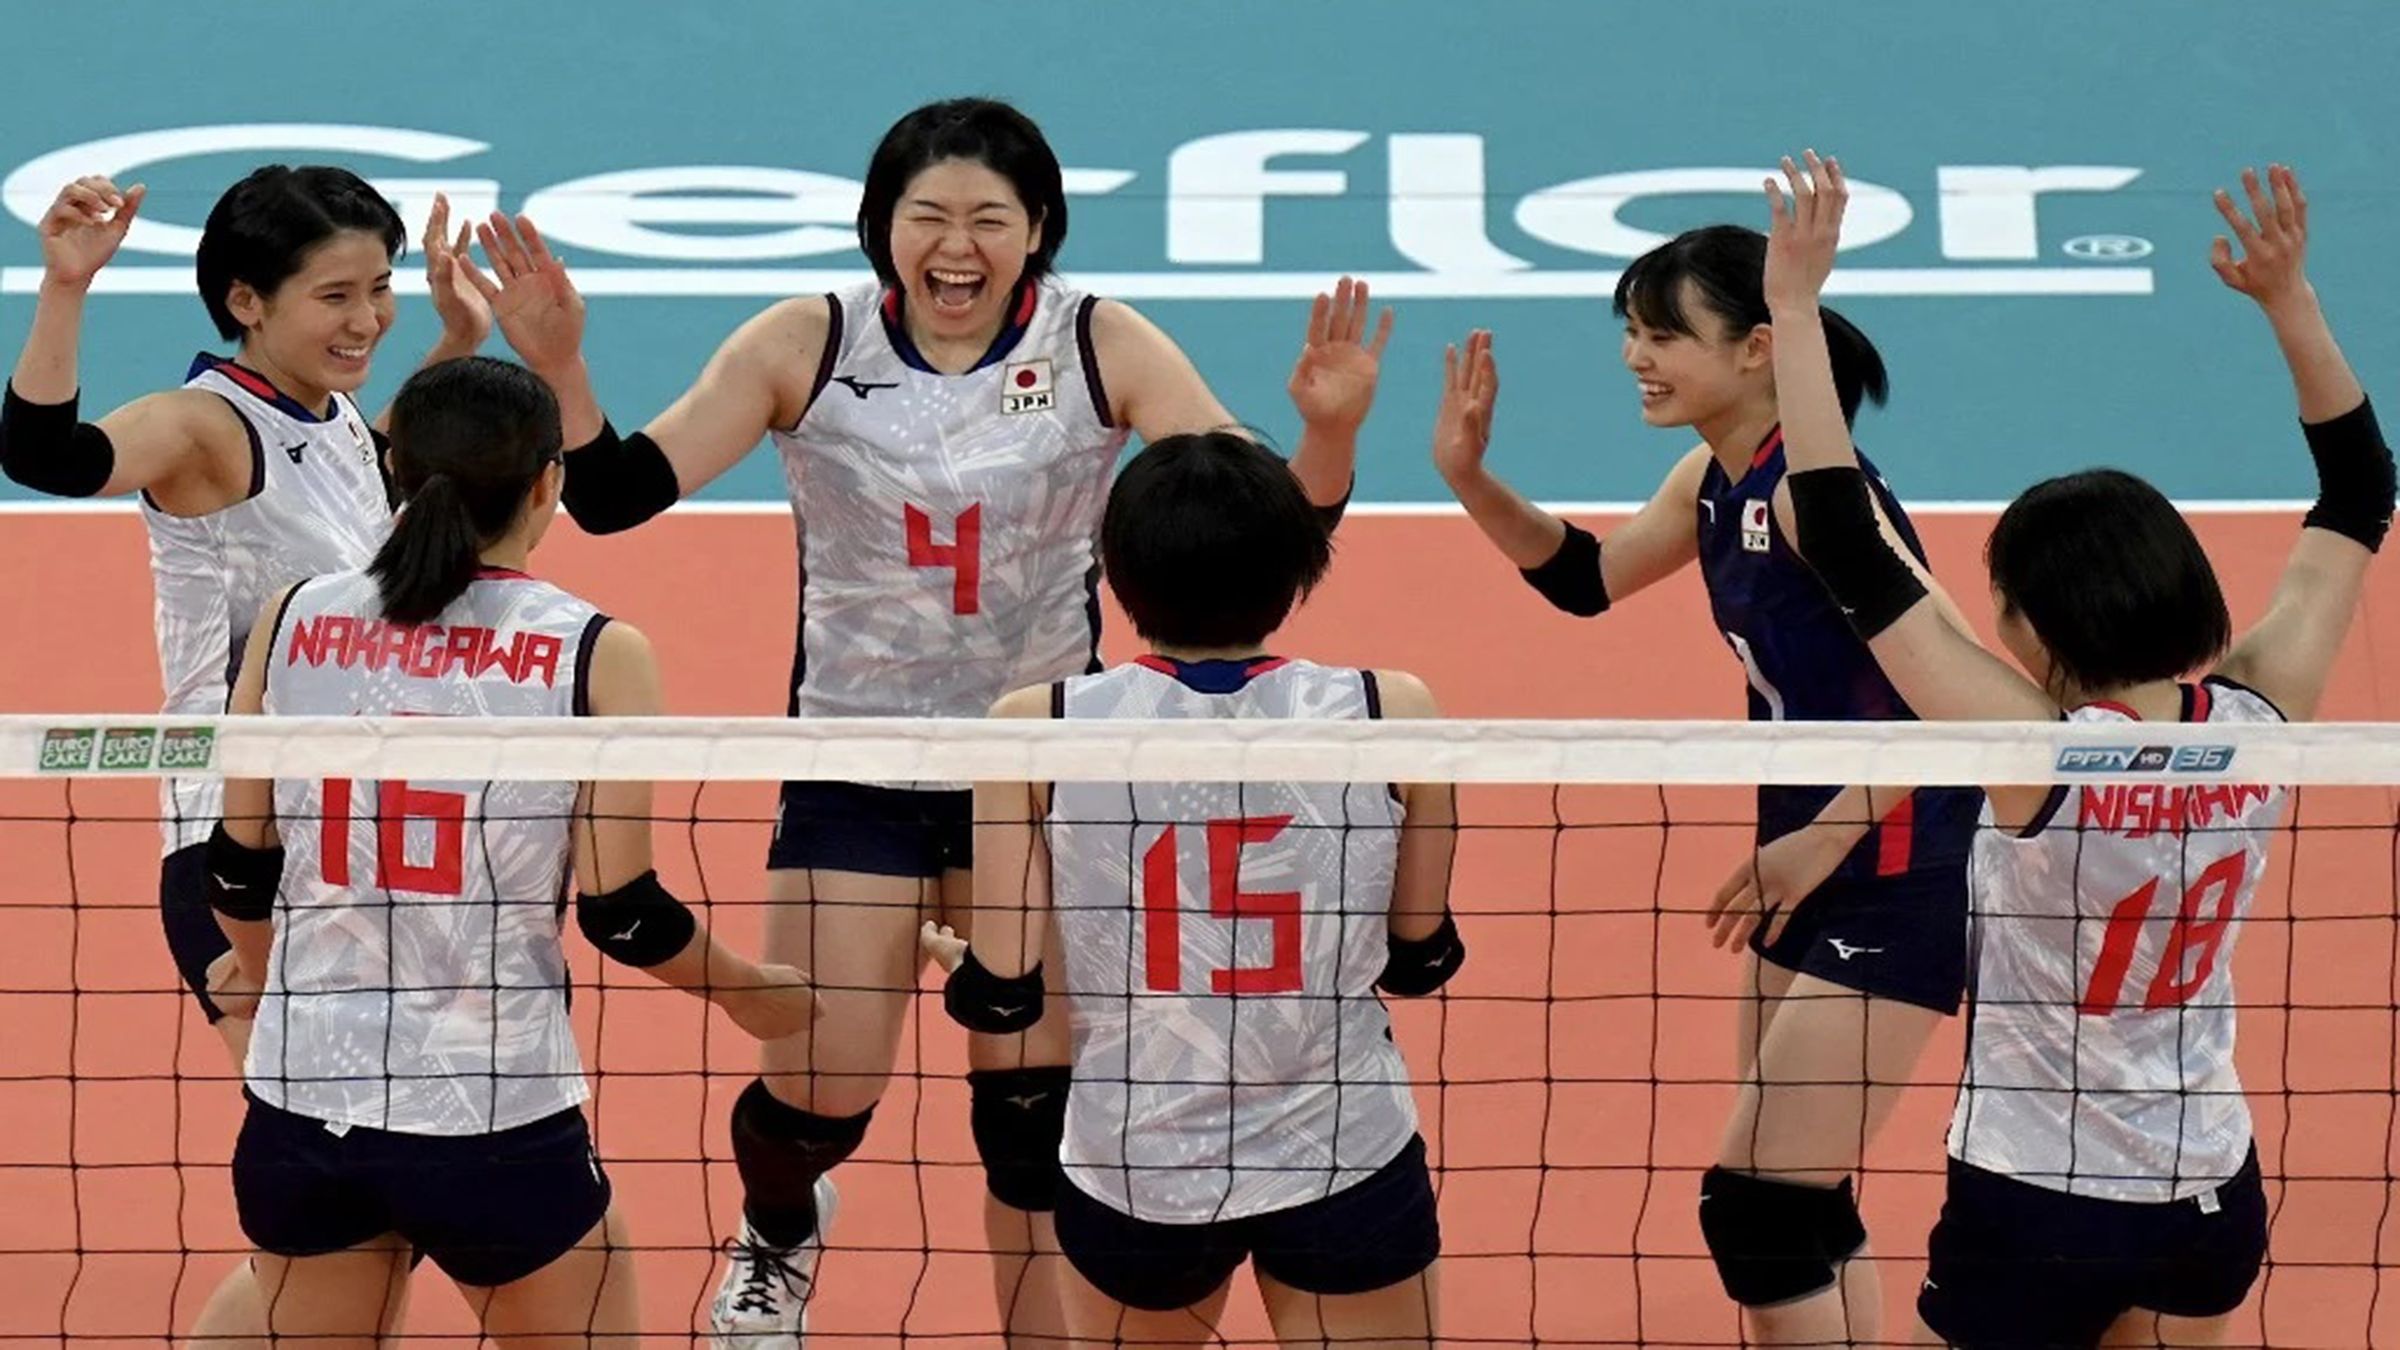 Japan upsets China to take AVC Cup Title